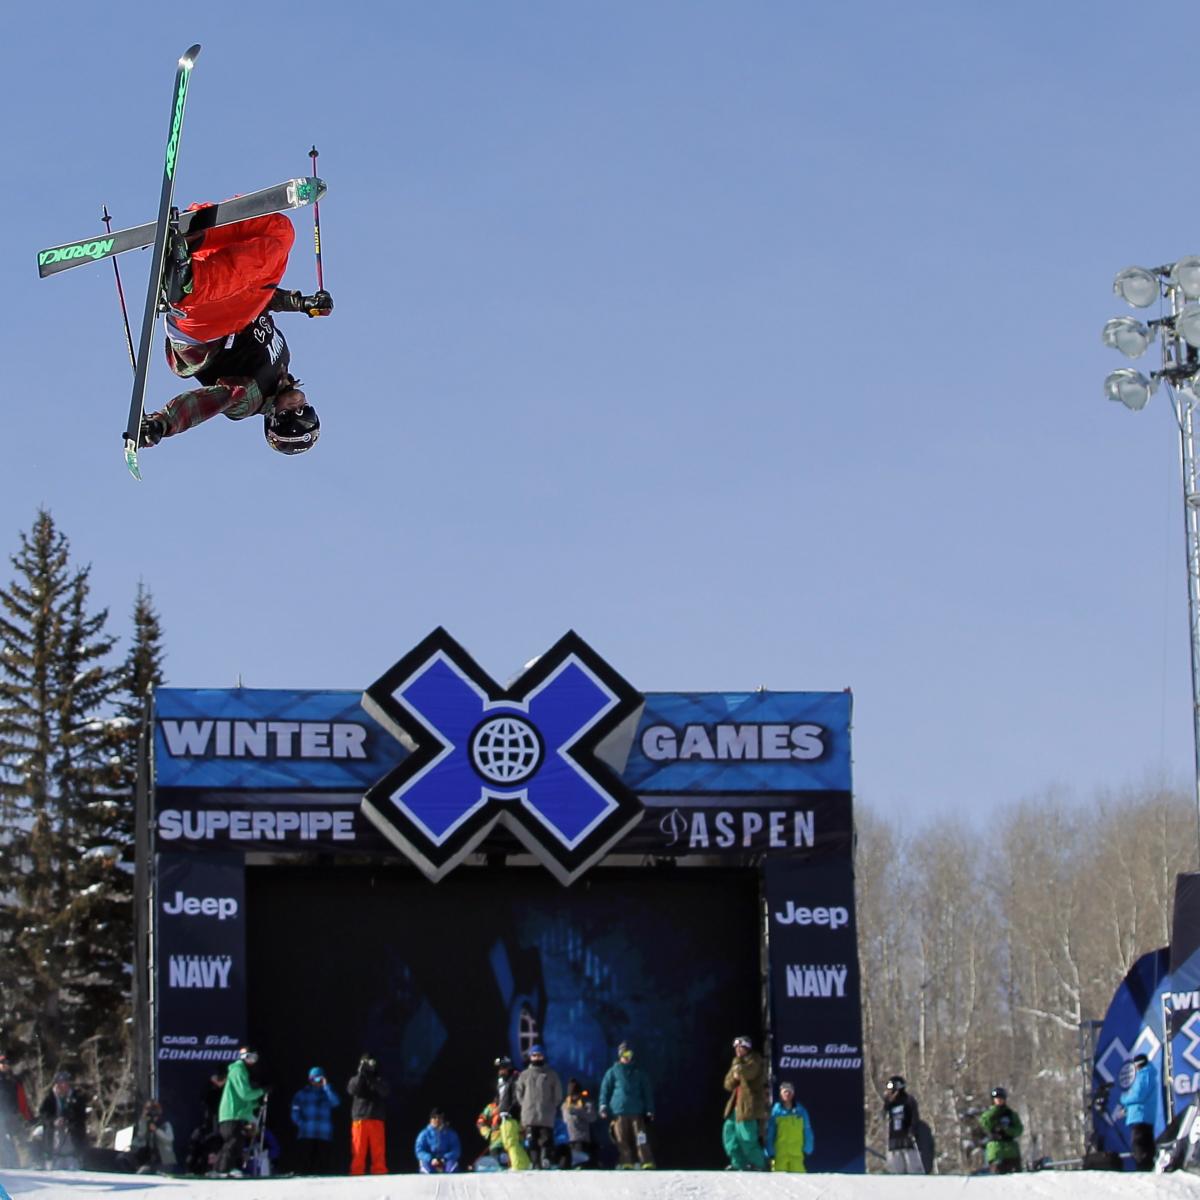 Winter X Games 16 TV Schedule and Events to Watch News, Scores